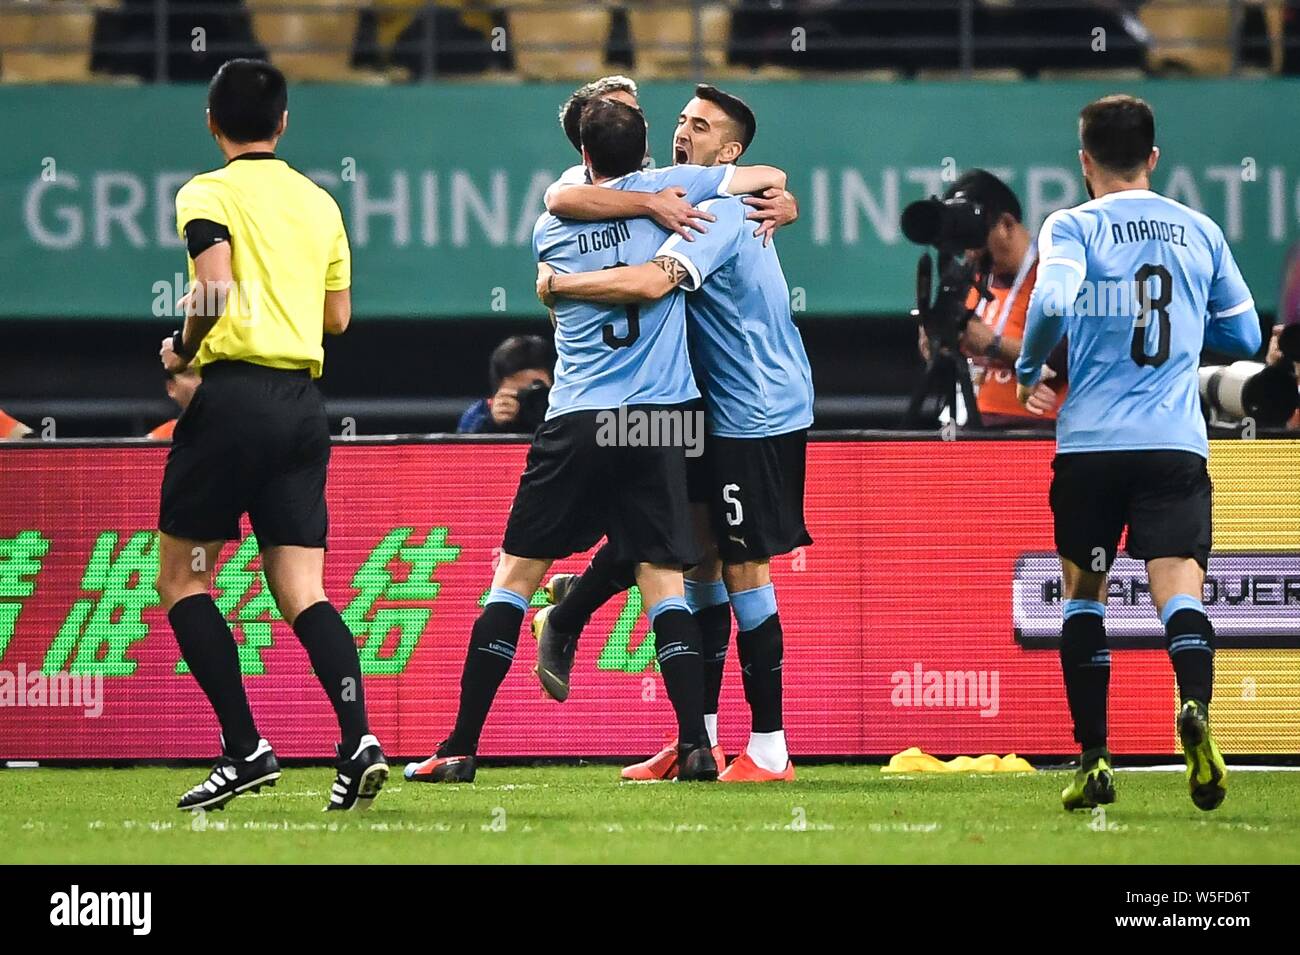 Matias Vecino, right, of Uruguay national football team celebrates with his teammates after scoring against Thailand national football team during the Stock Photo